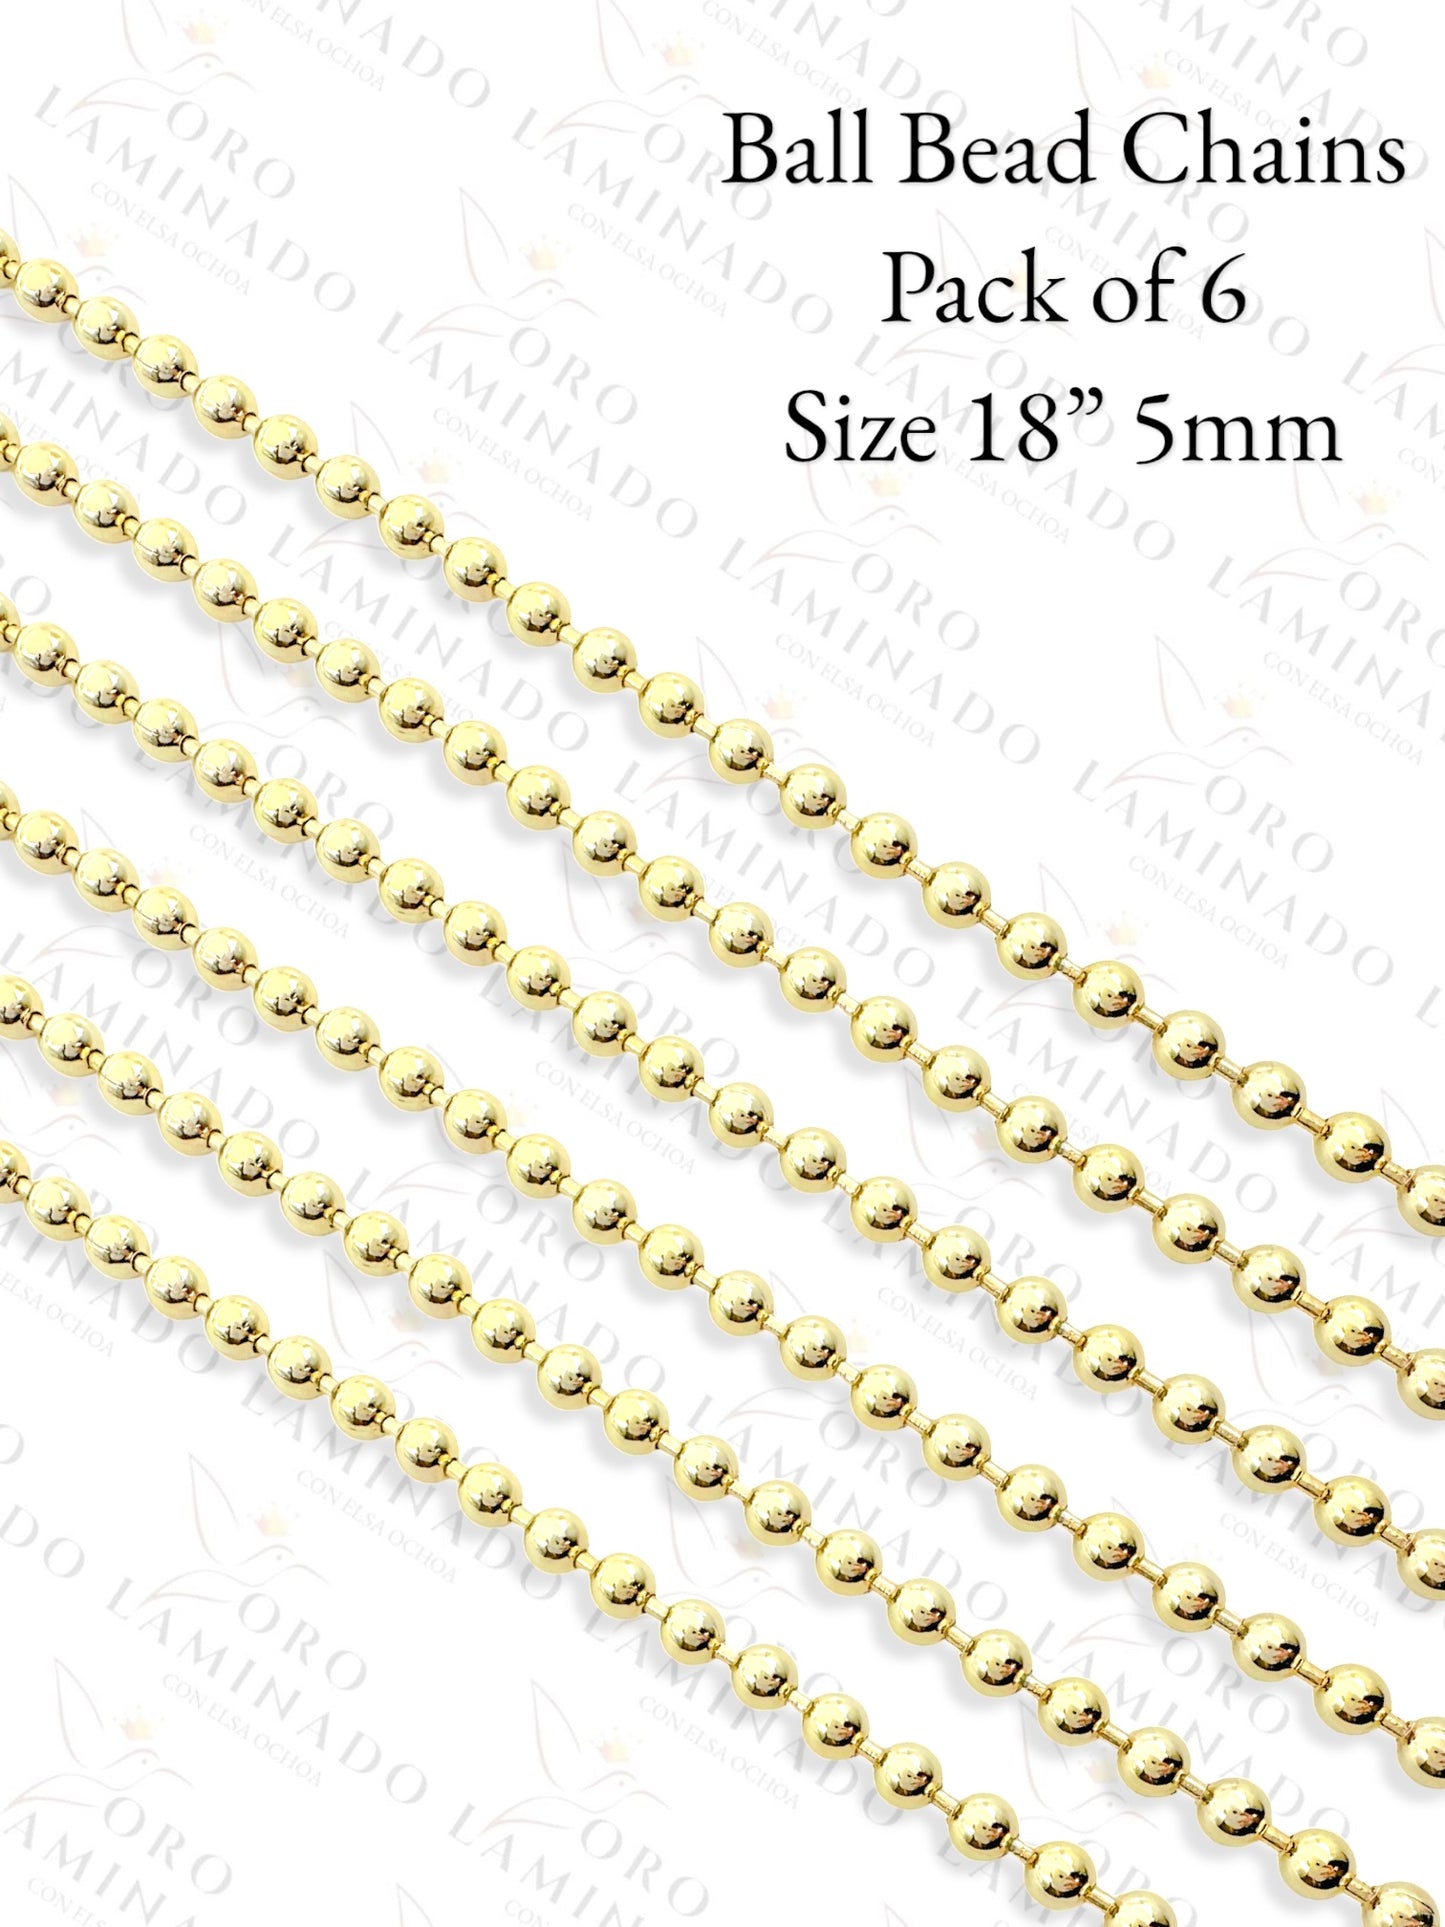 High Quality Ball Bead Chains Pack of 6 Size 18" 5mm C34